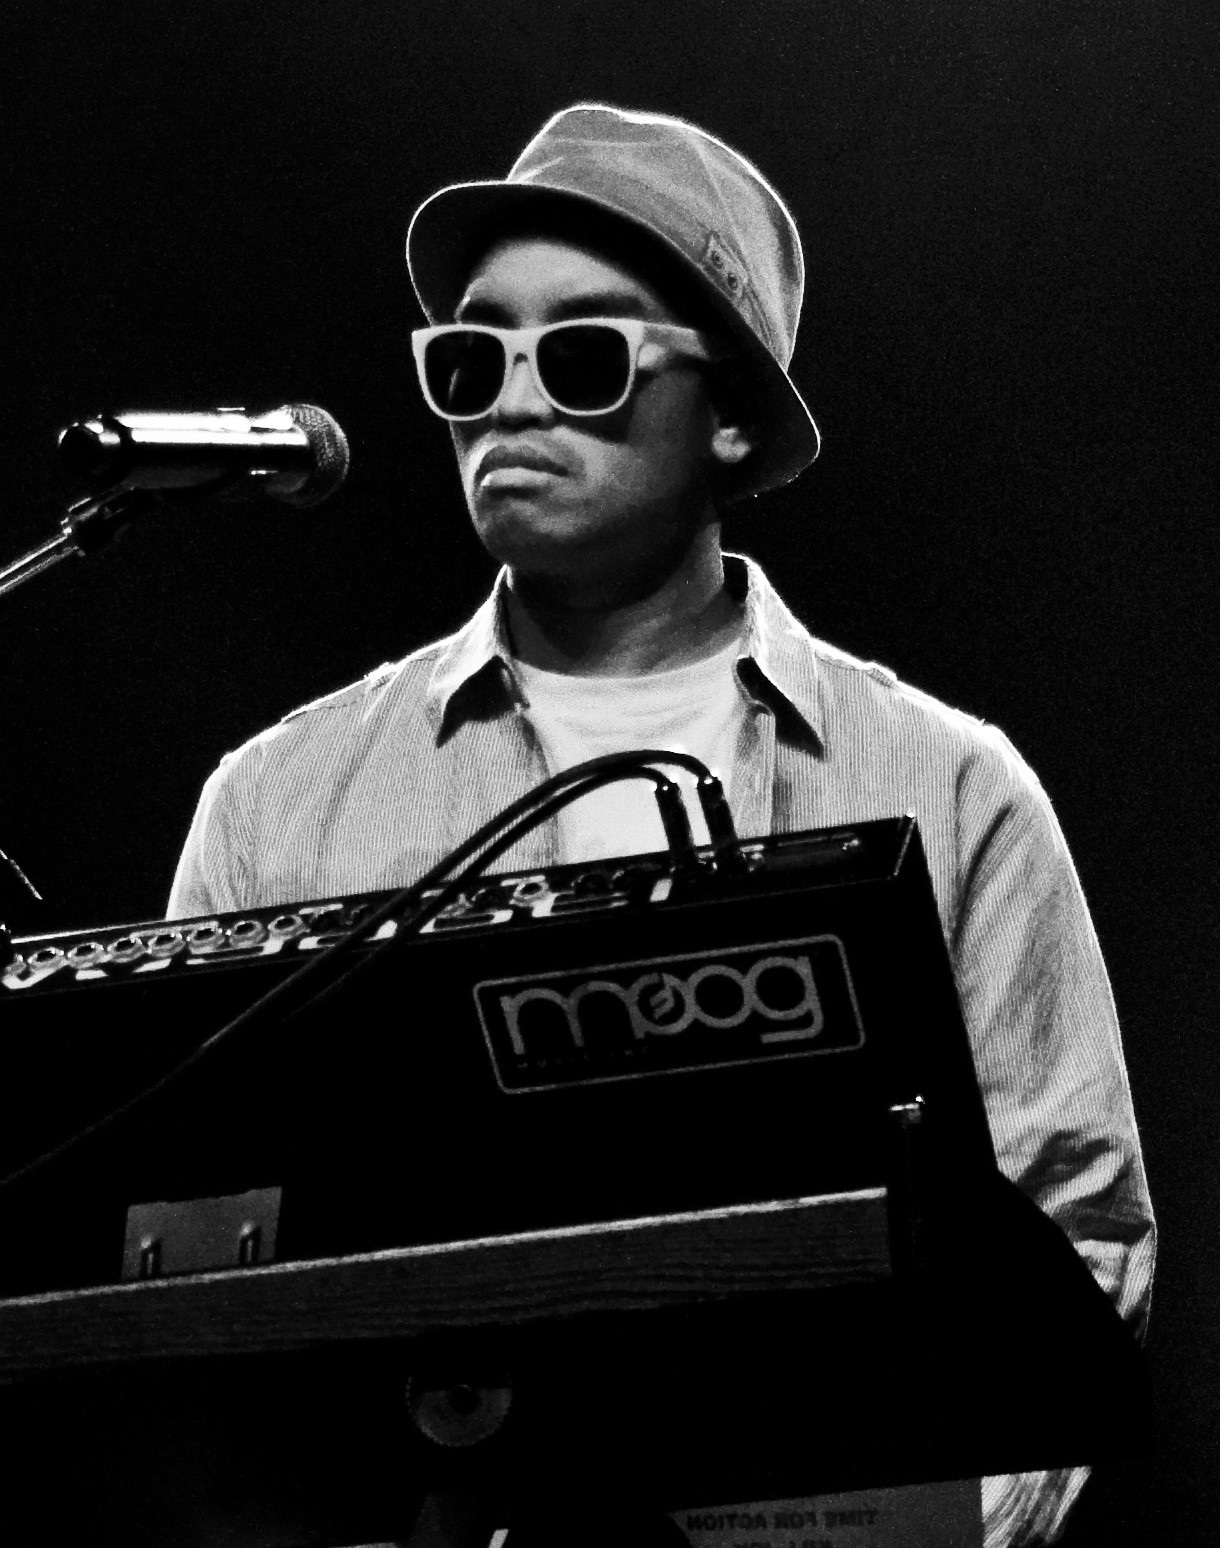 Hugo performing with [[N.E.R.D.]] in 2009